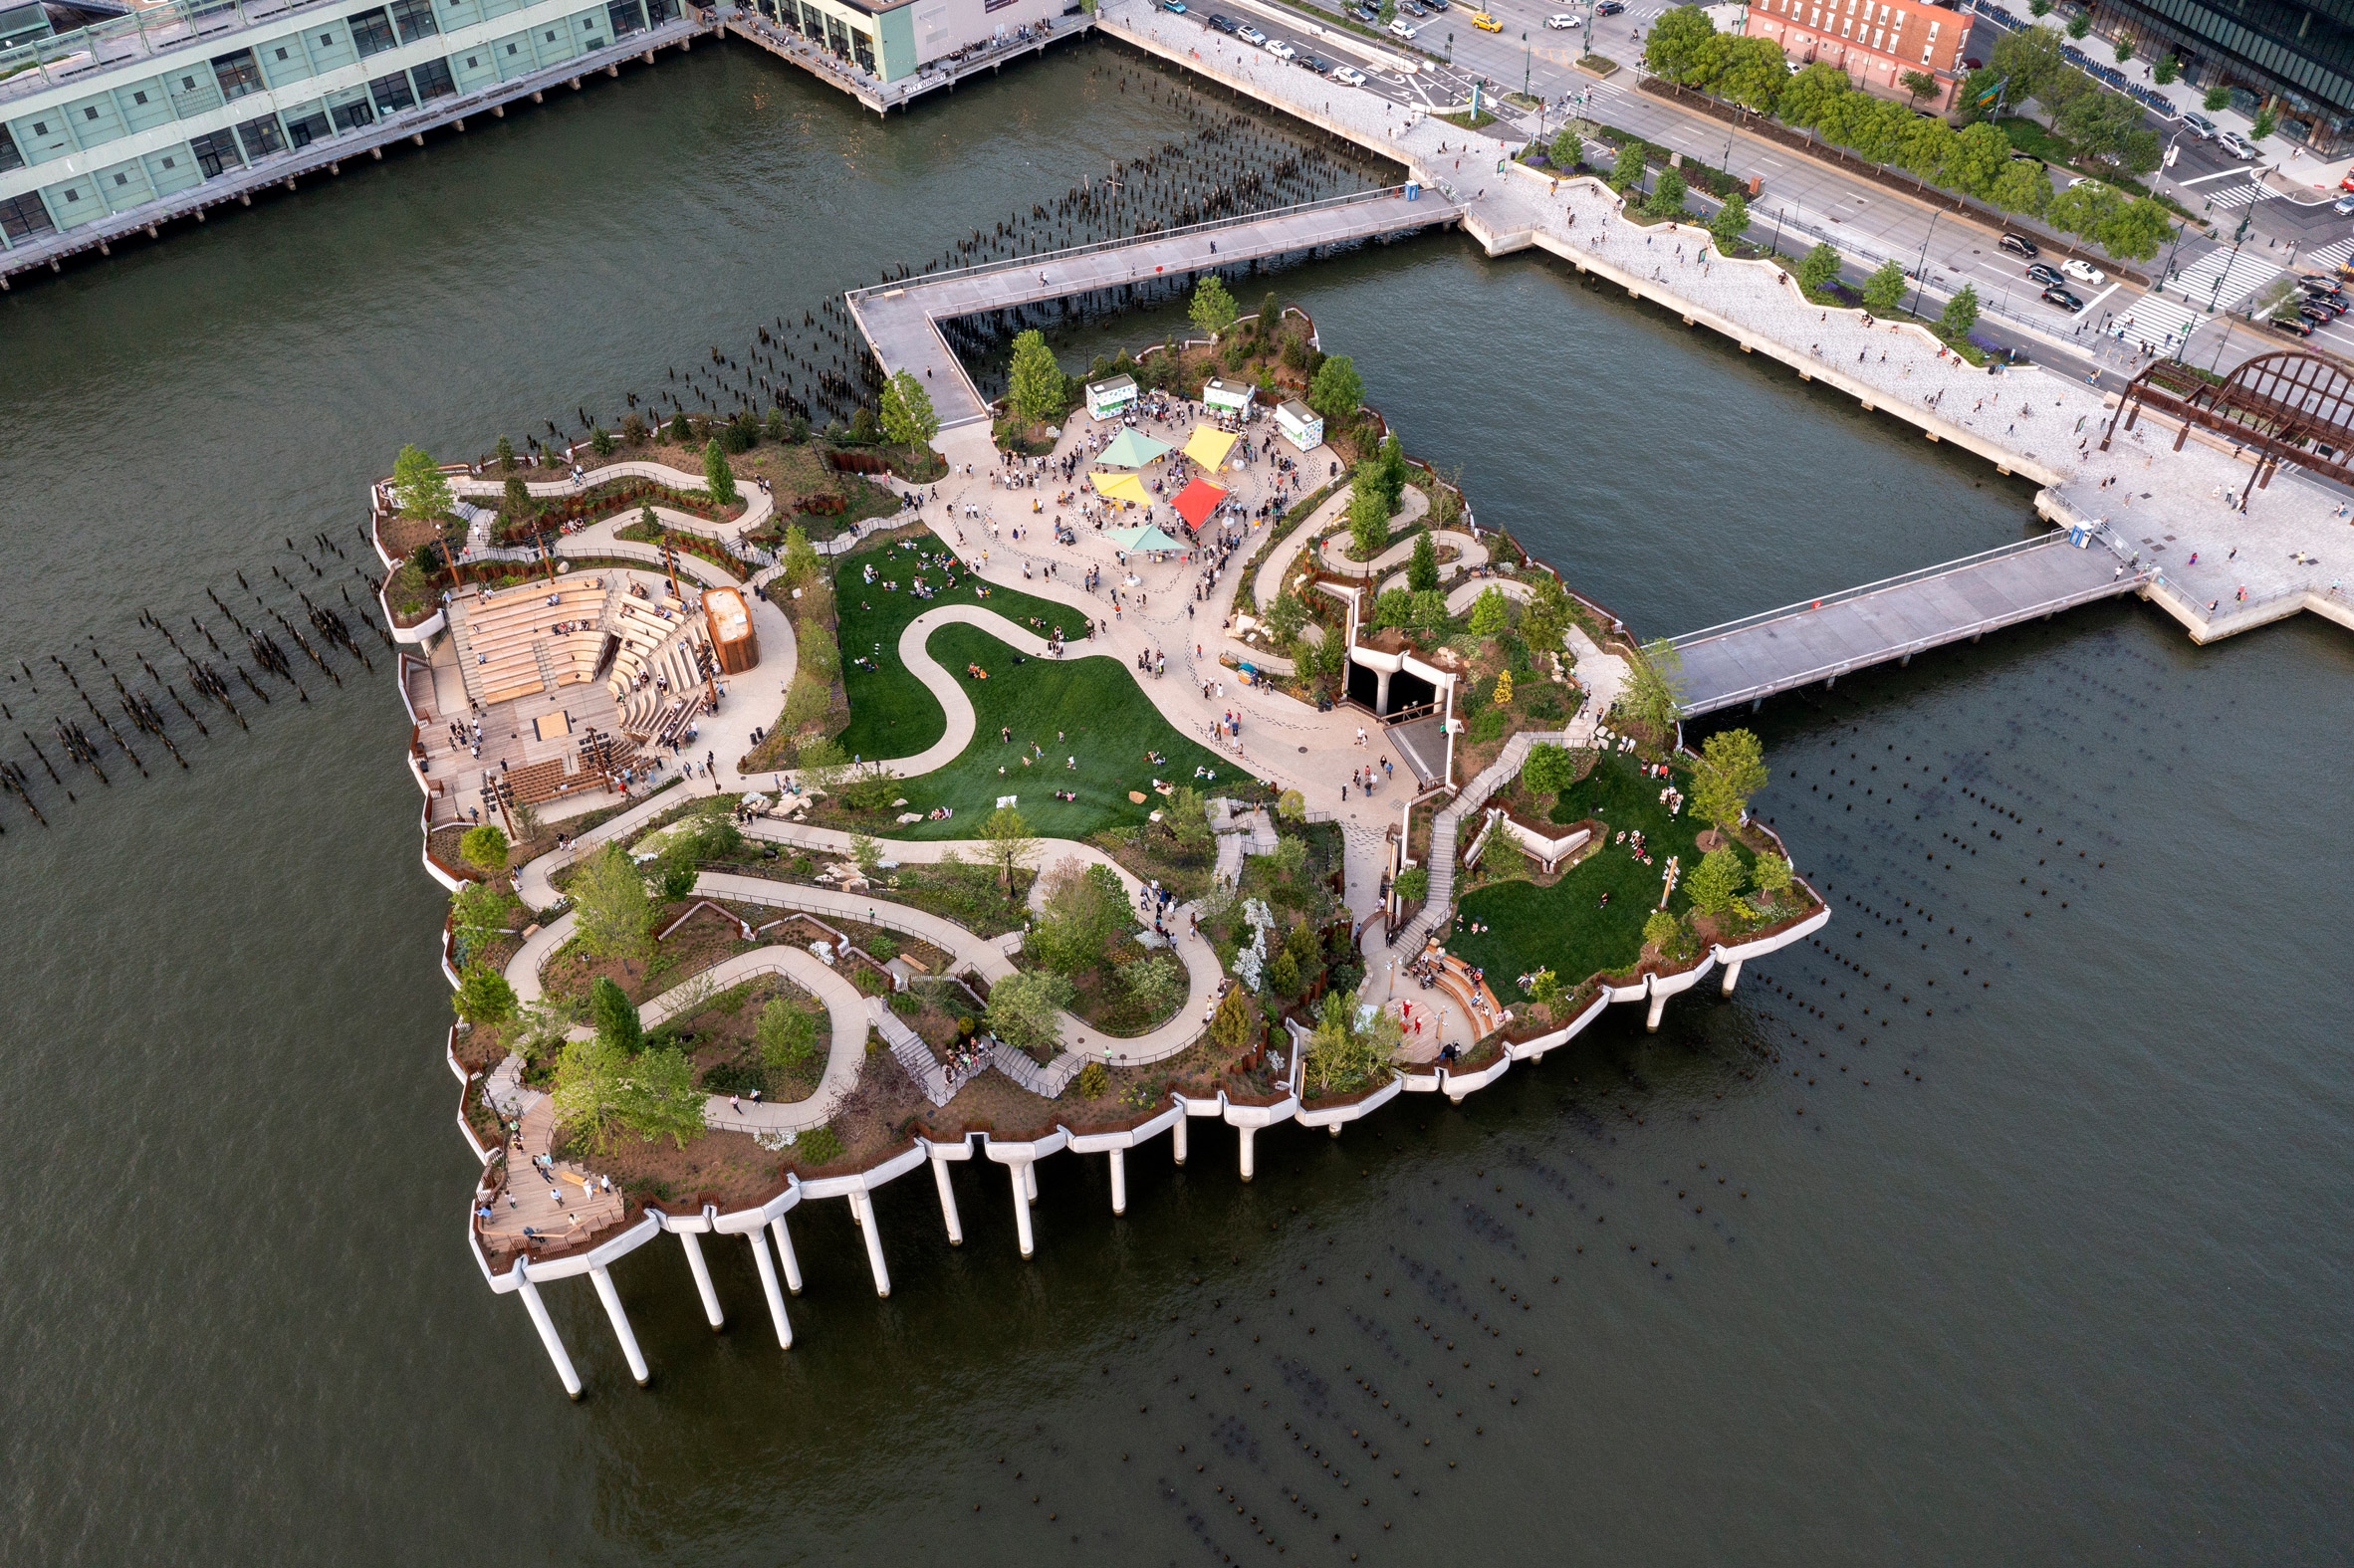 Randall's Island Park Becomes First New York City Park To Receive